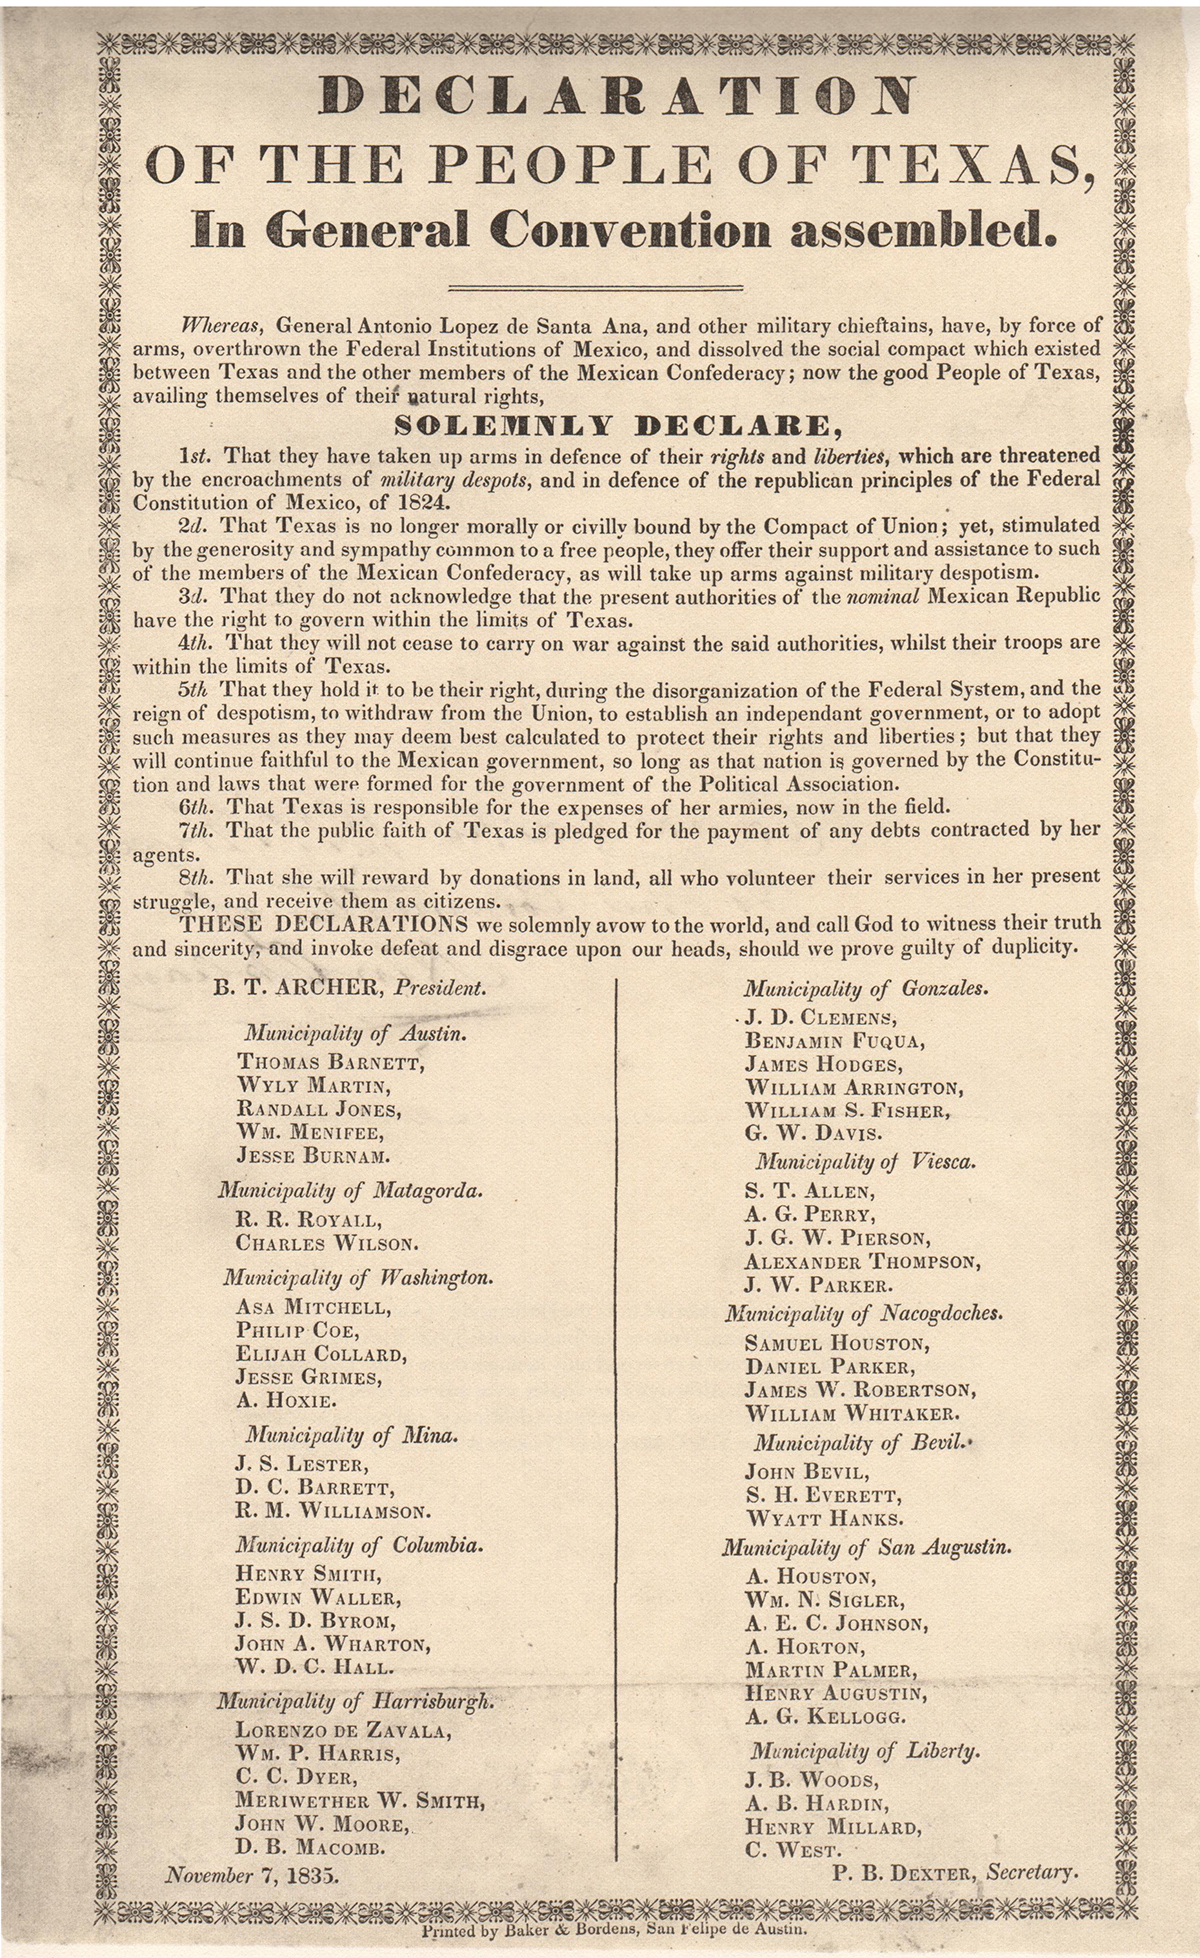 Declaration of the People of Texas (1835)